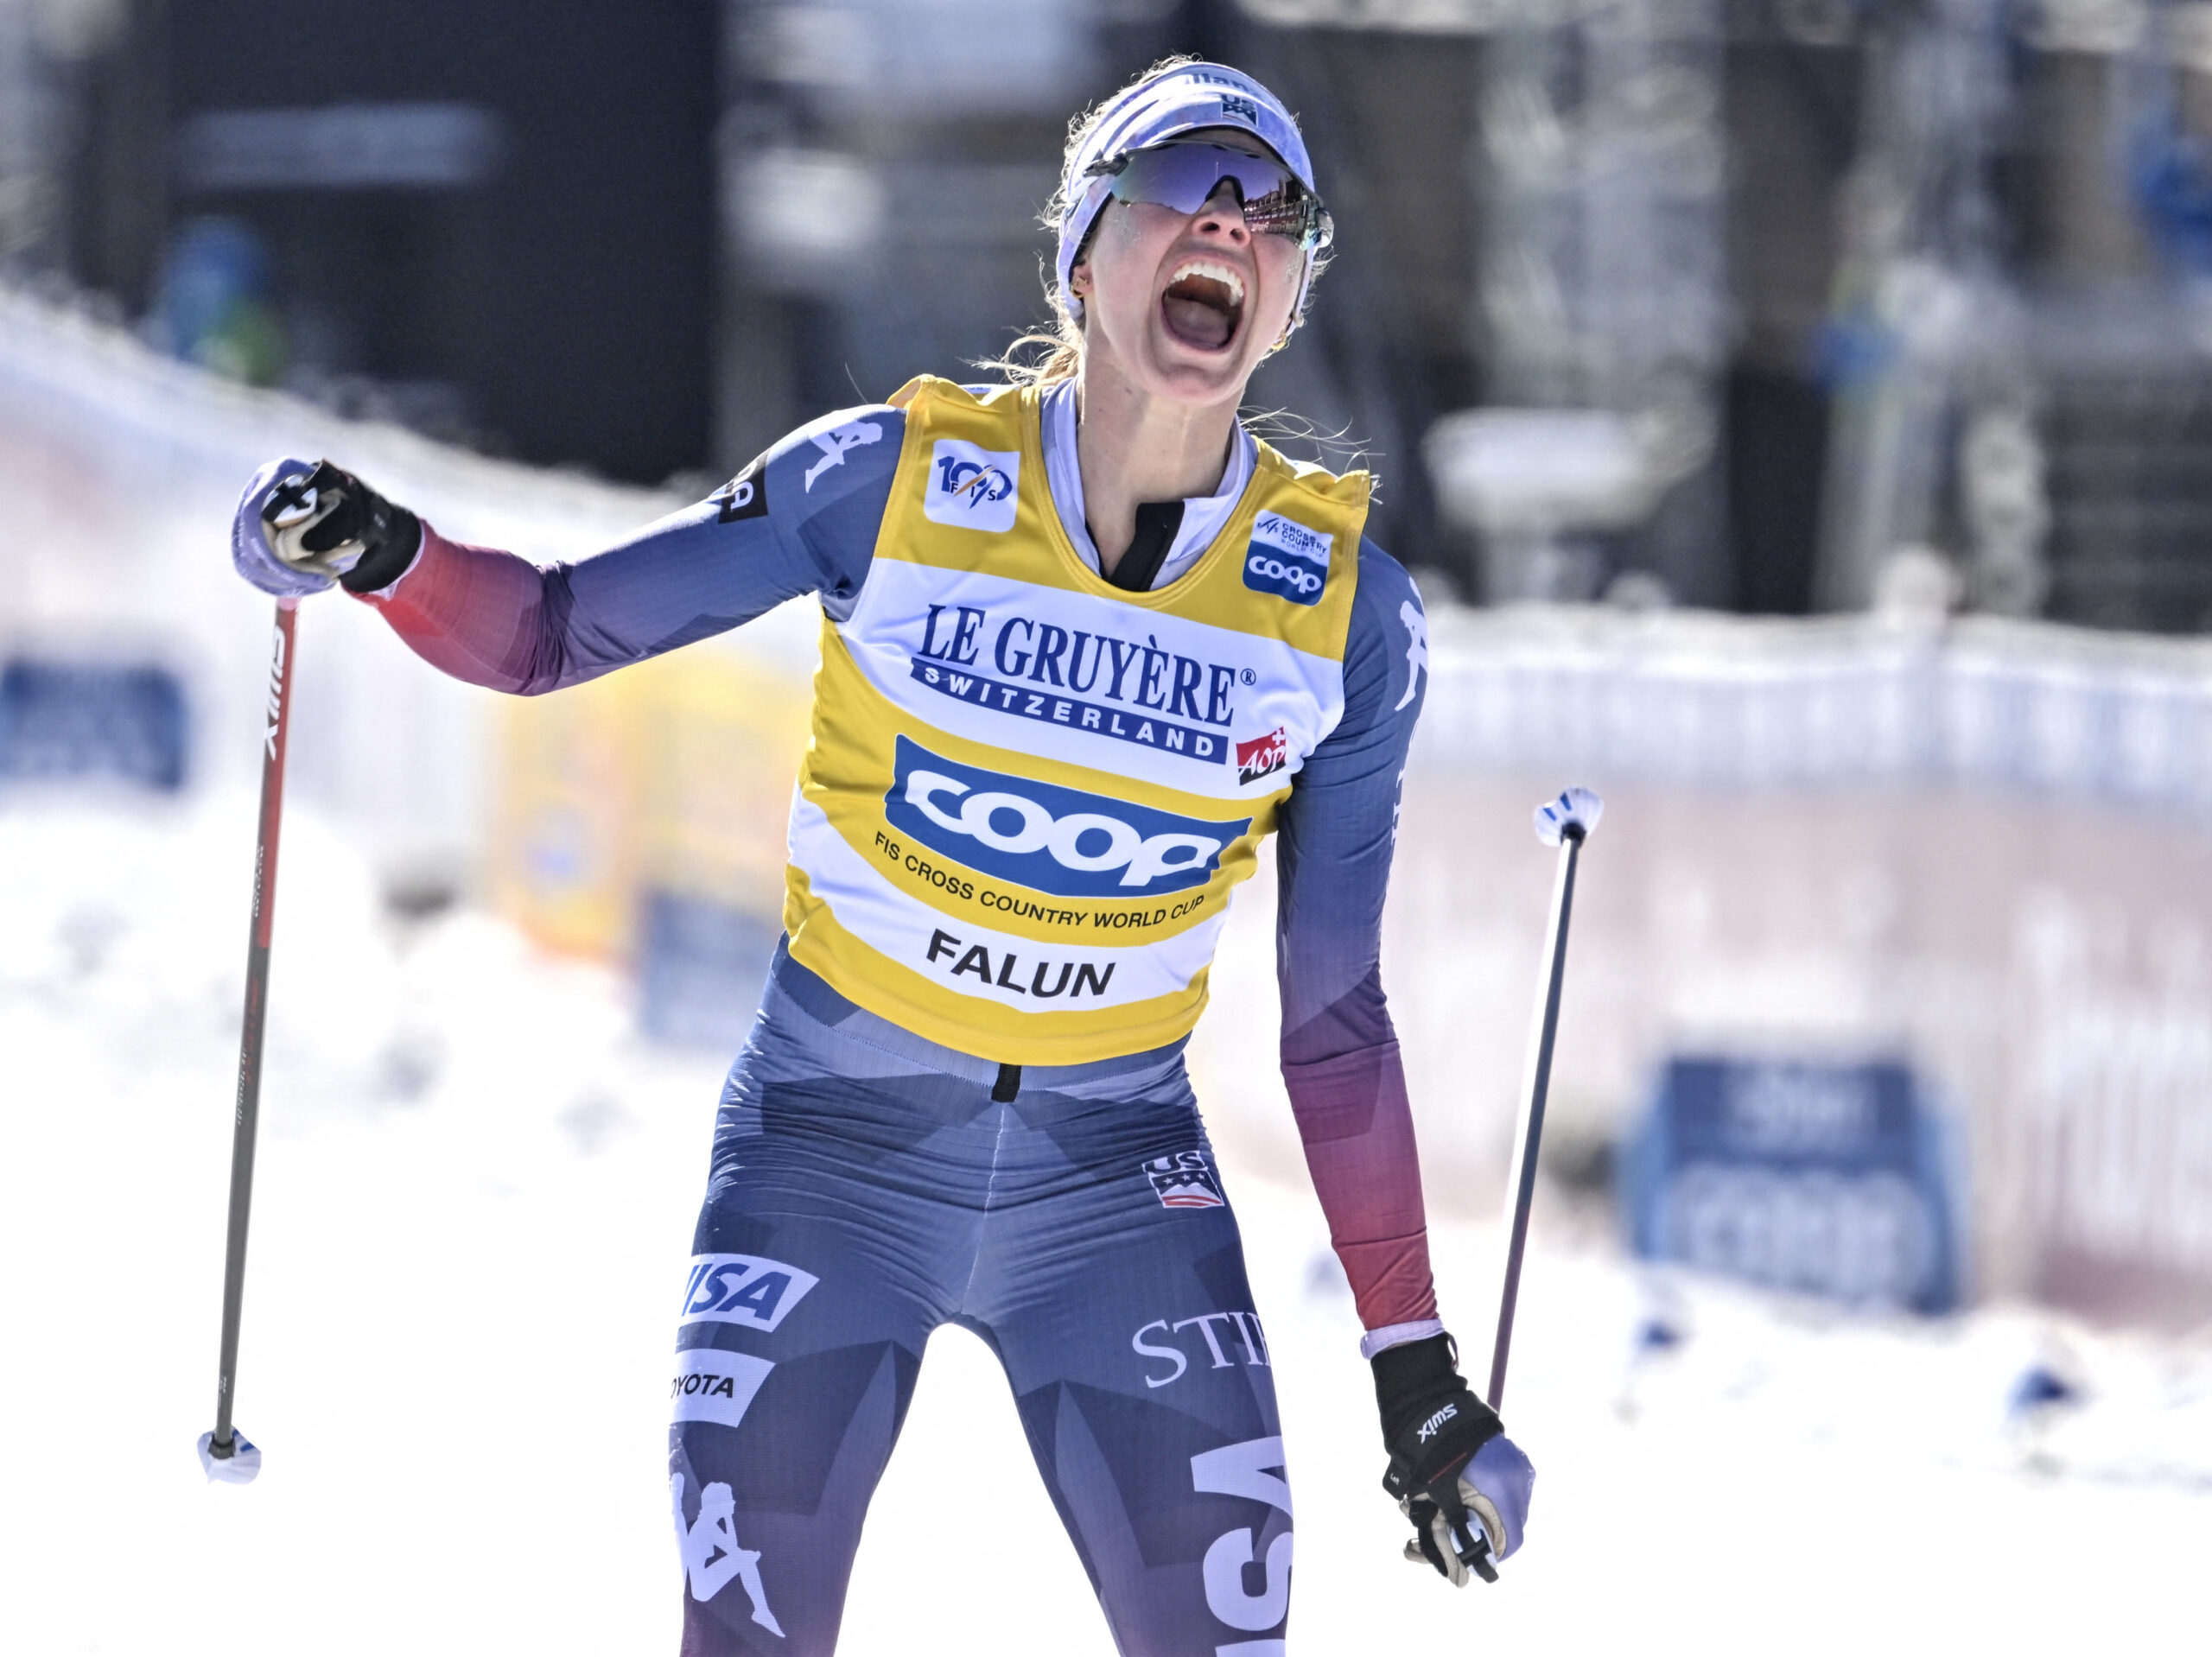 Jessie Diggins is a U.S. cross-country ski powerhouse after 2nd World Cup win